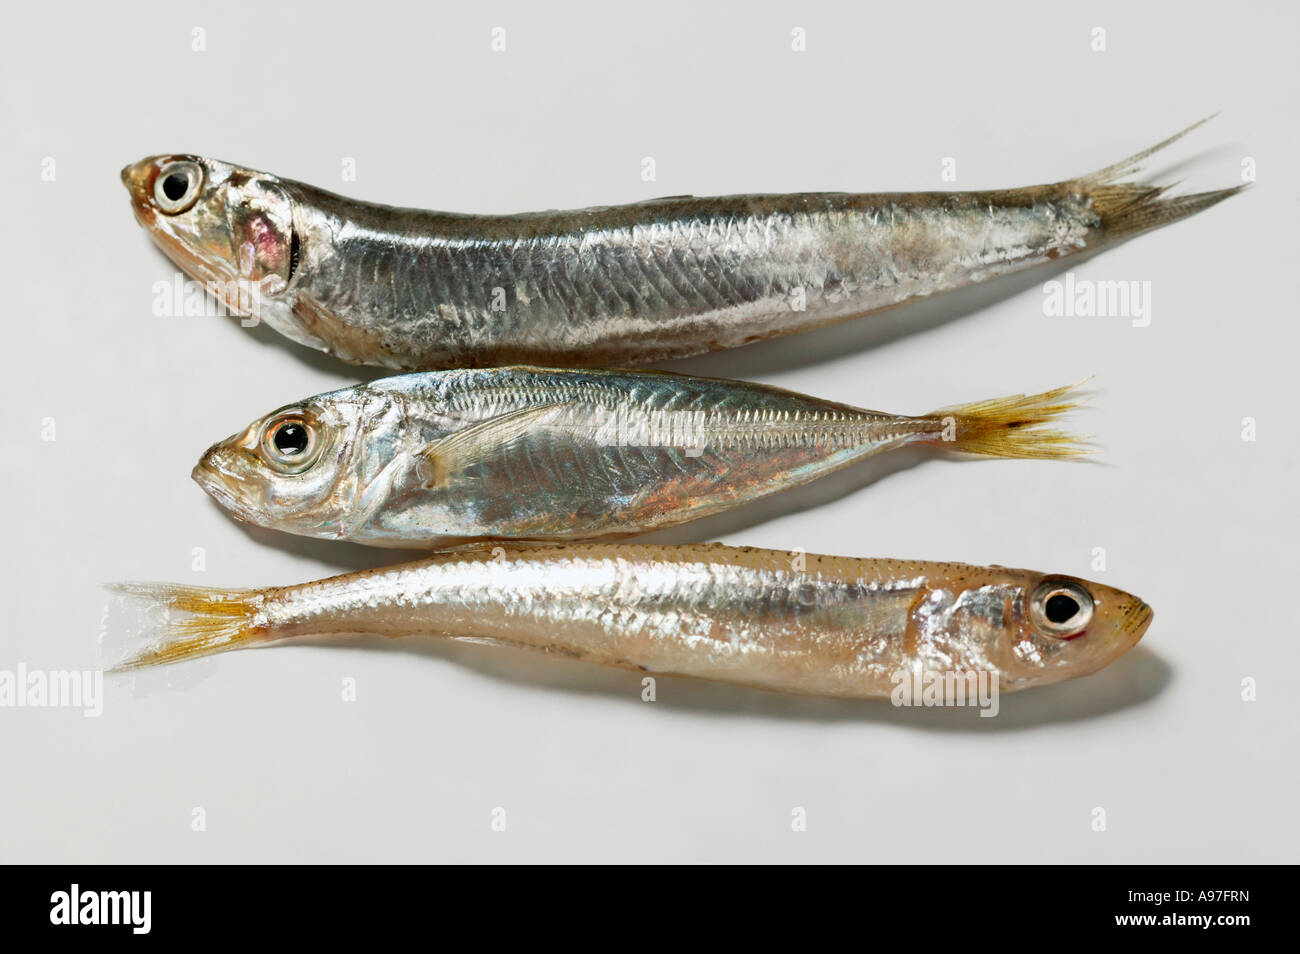 Small sandsmelts and anchovy FoodCollection Stock Photo